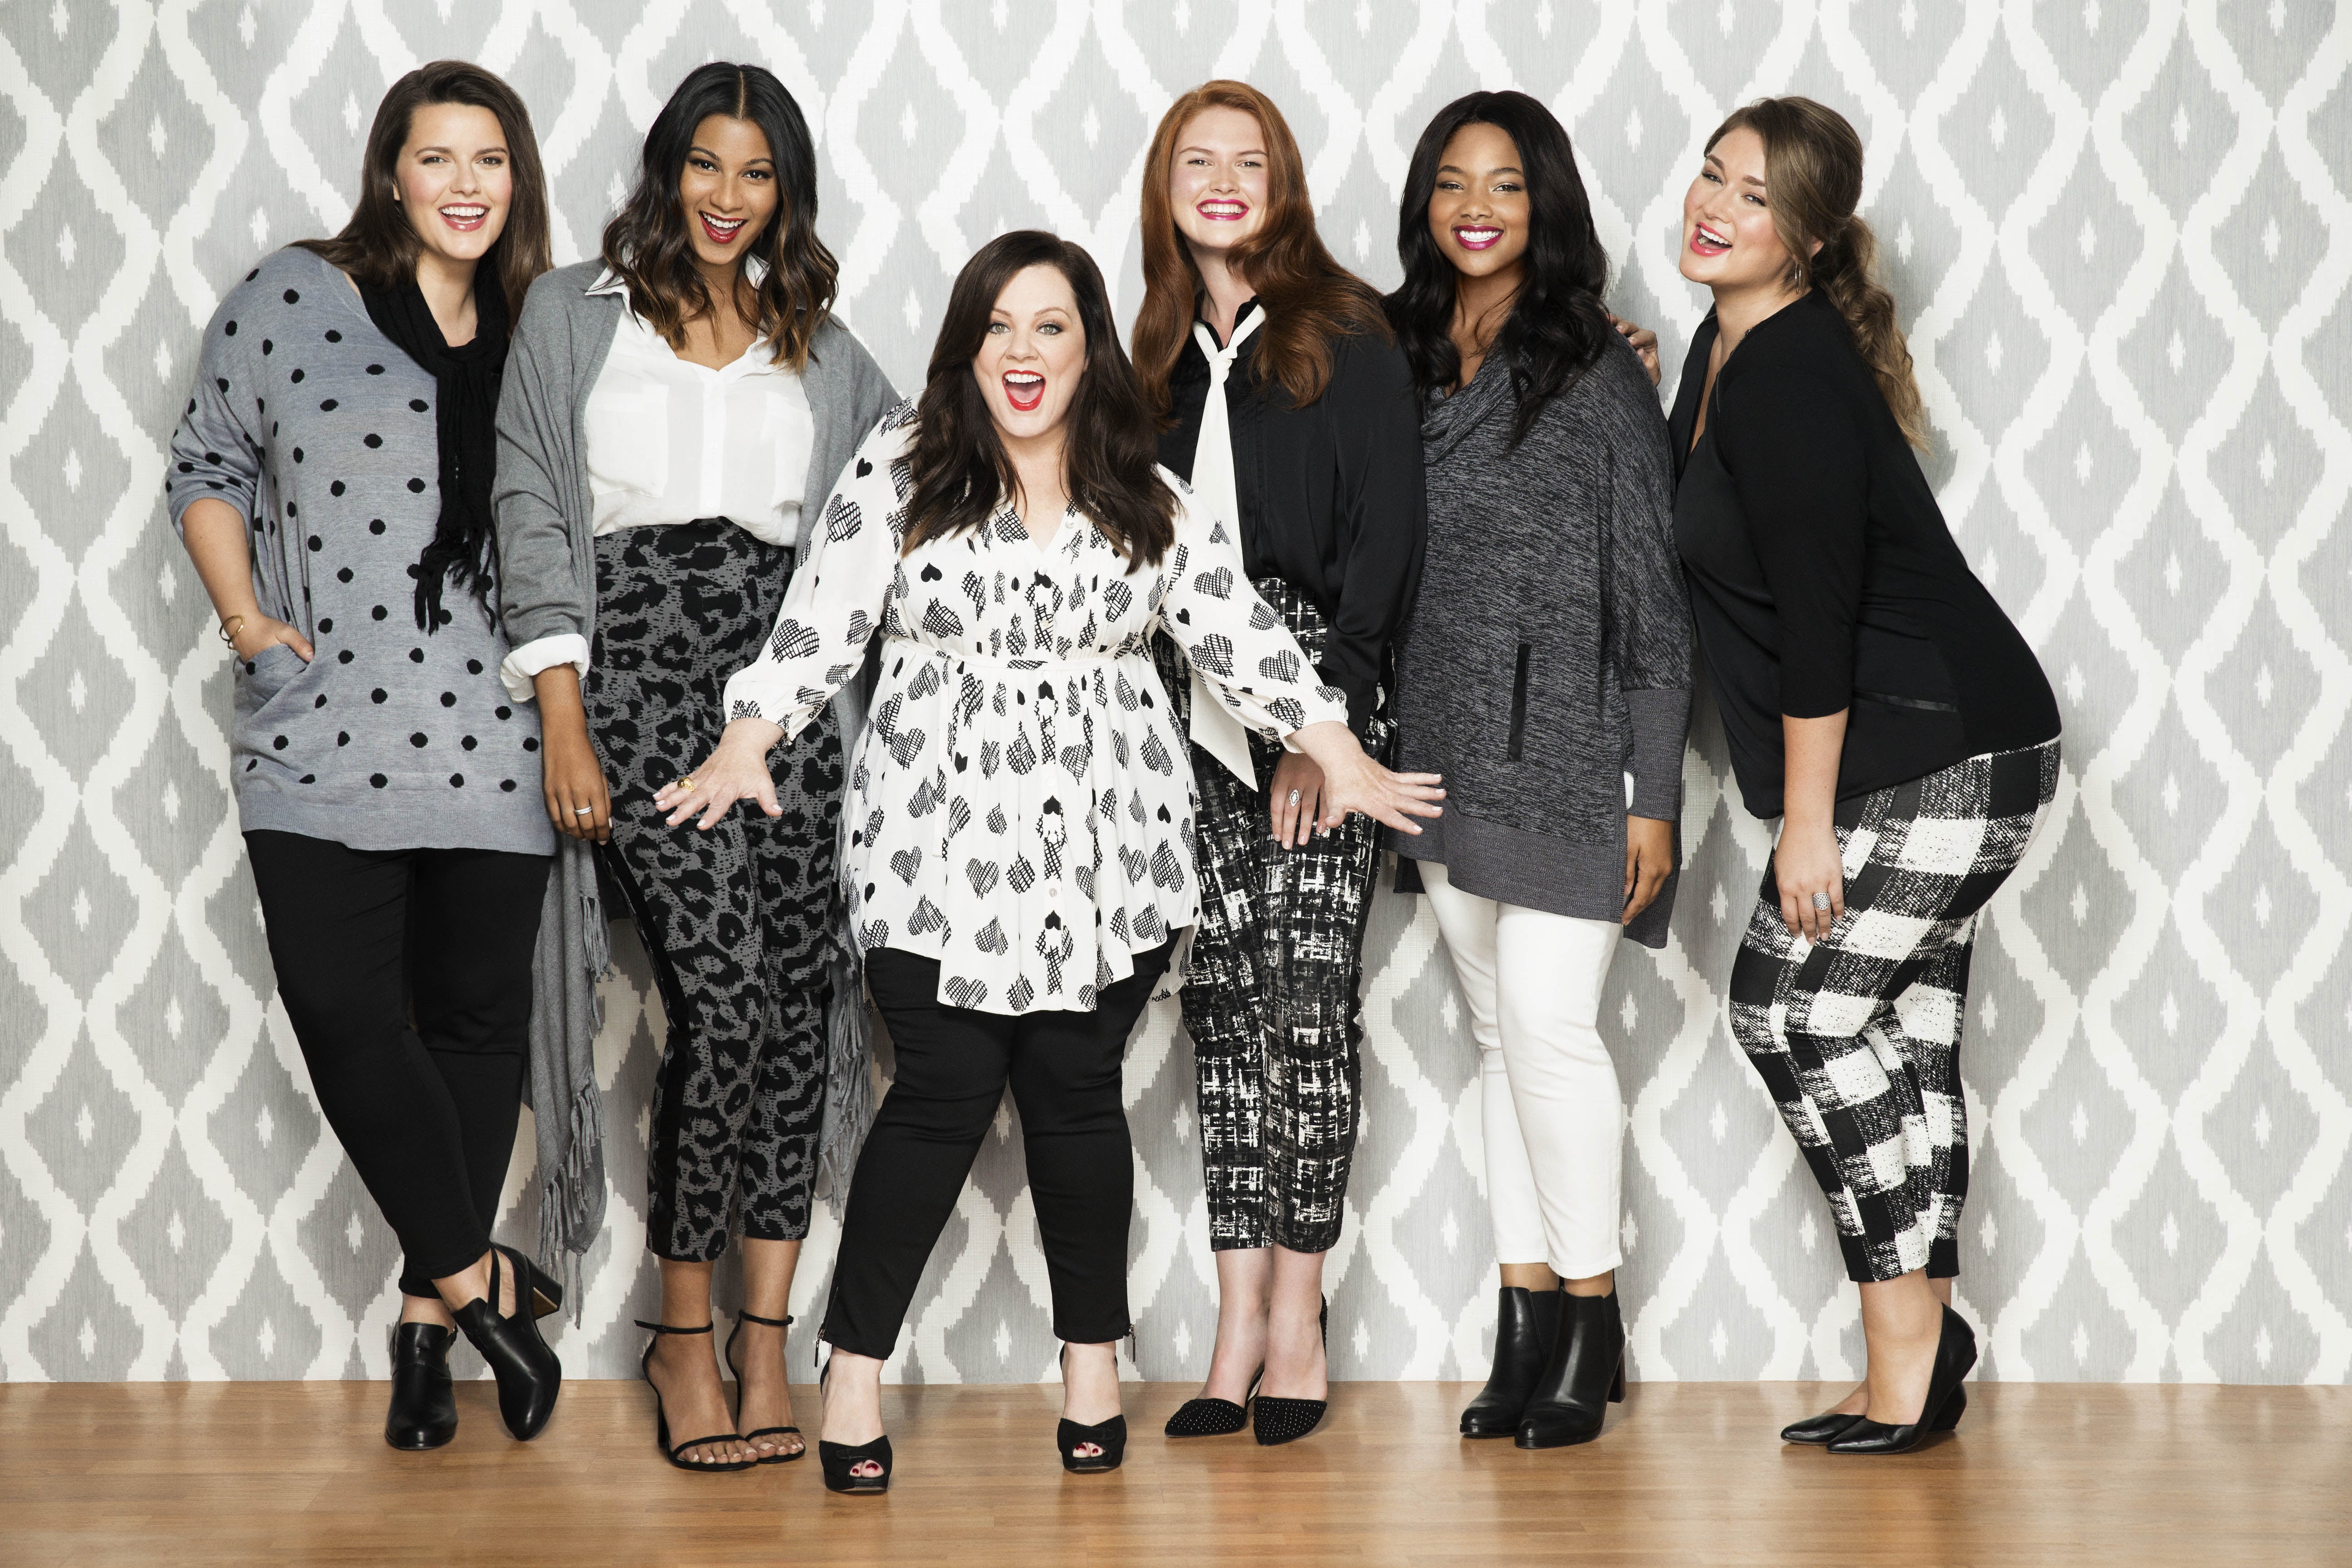 Plus-size fashion growing, with help from celebs like Melissa